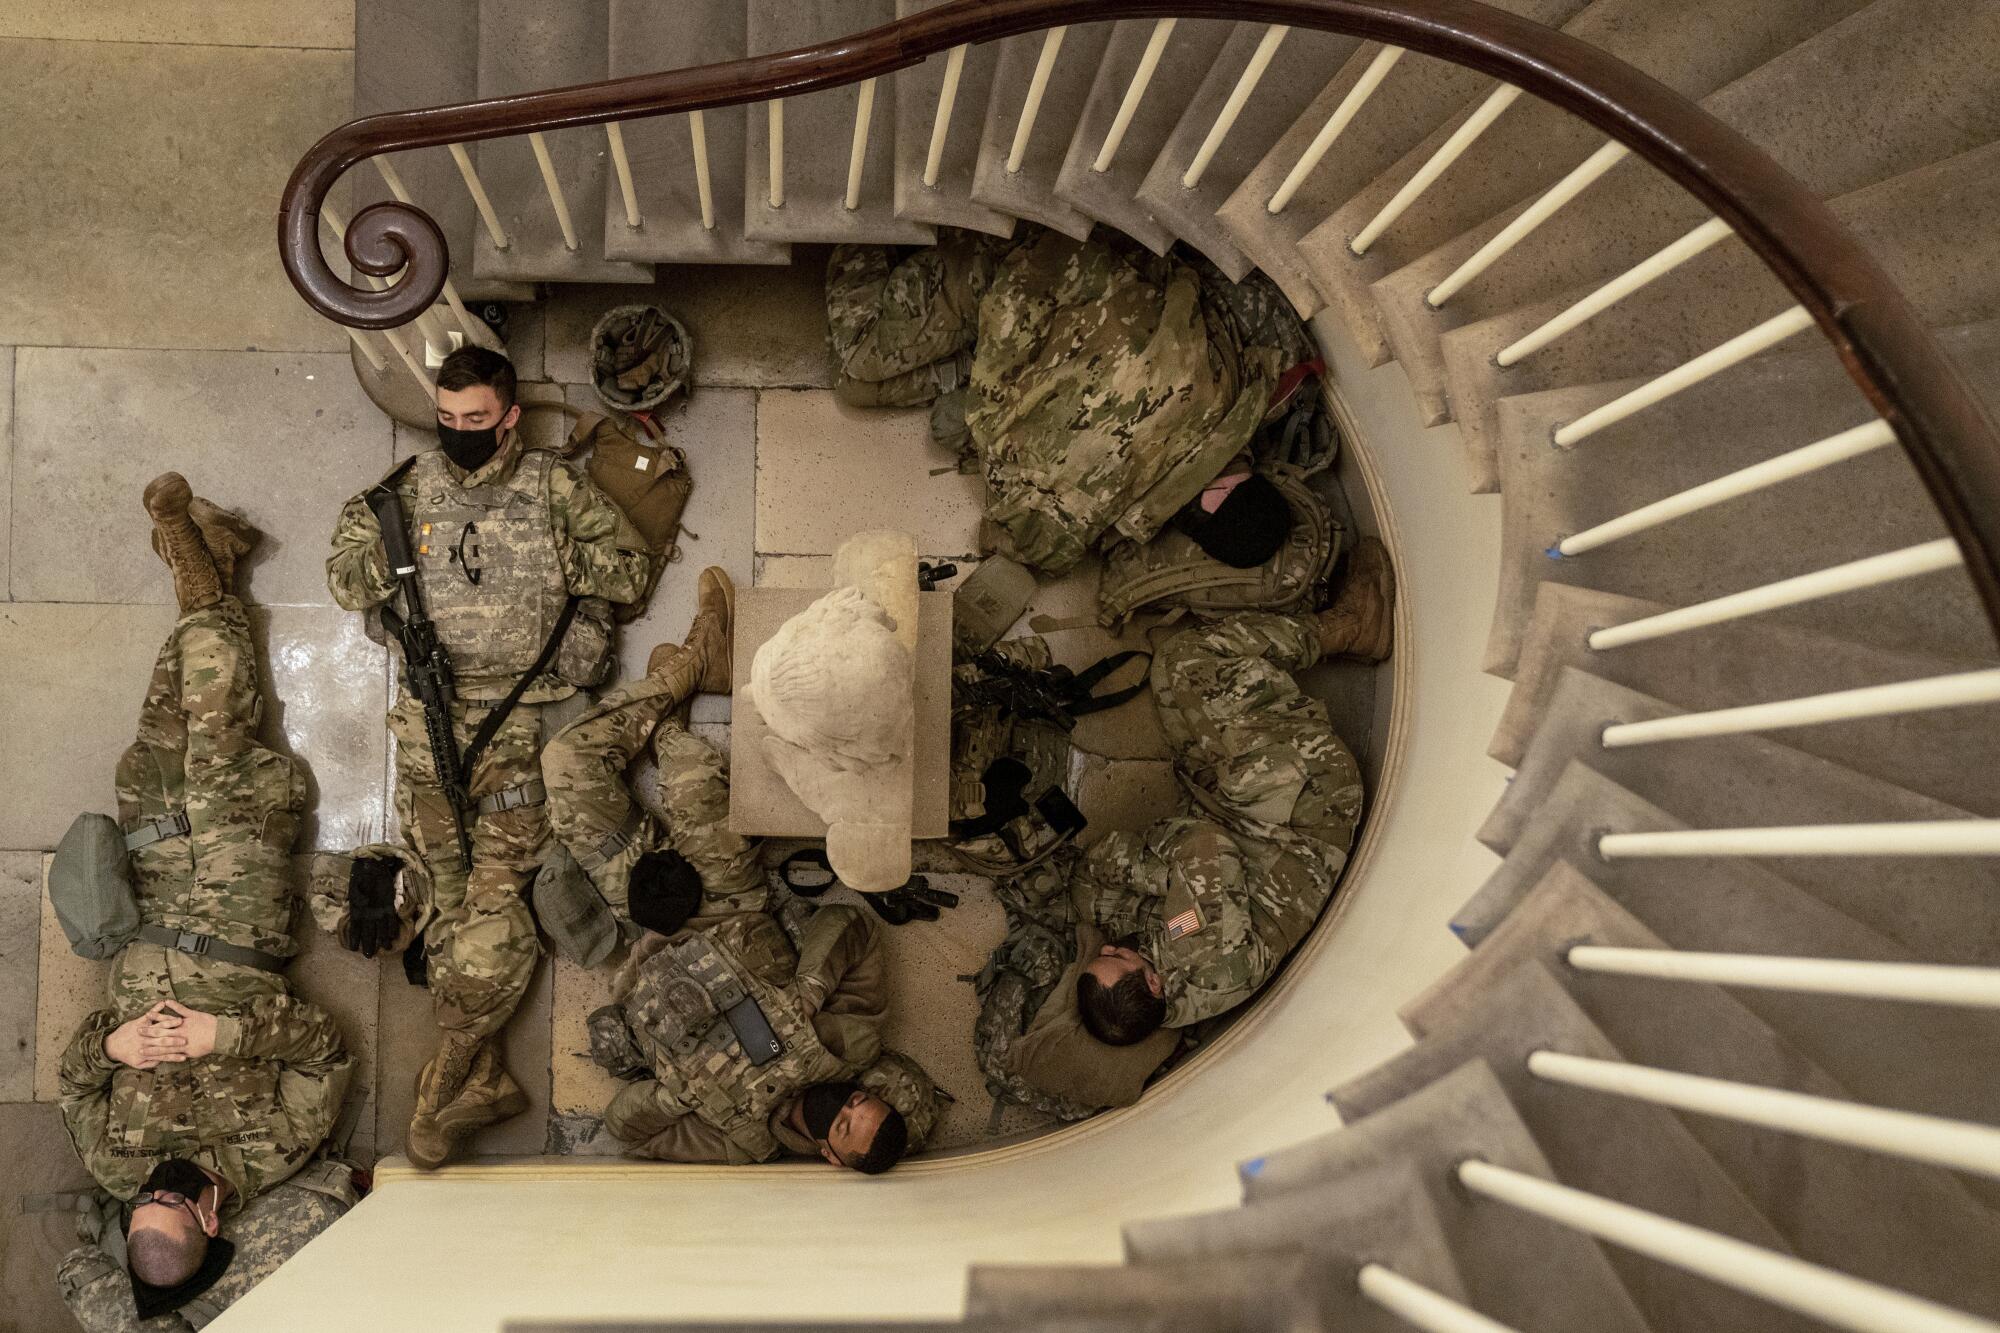 Jan. 13: Members of the National Guard sleep in the halls of the U.S. Capitol.